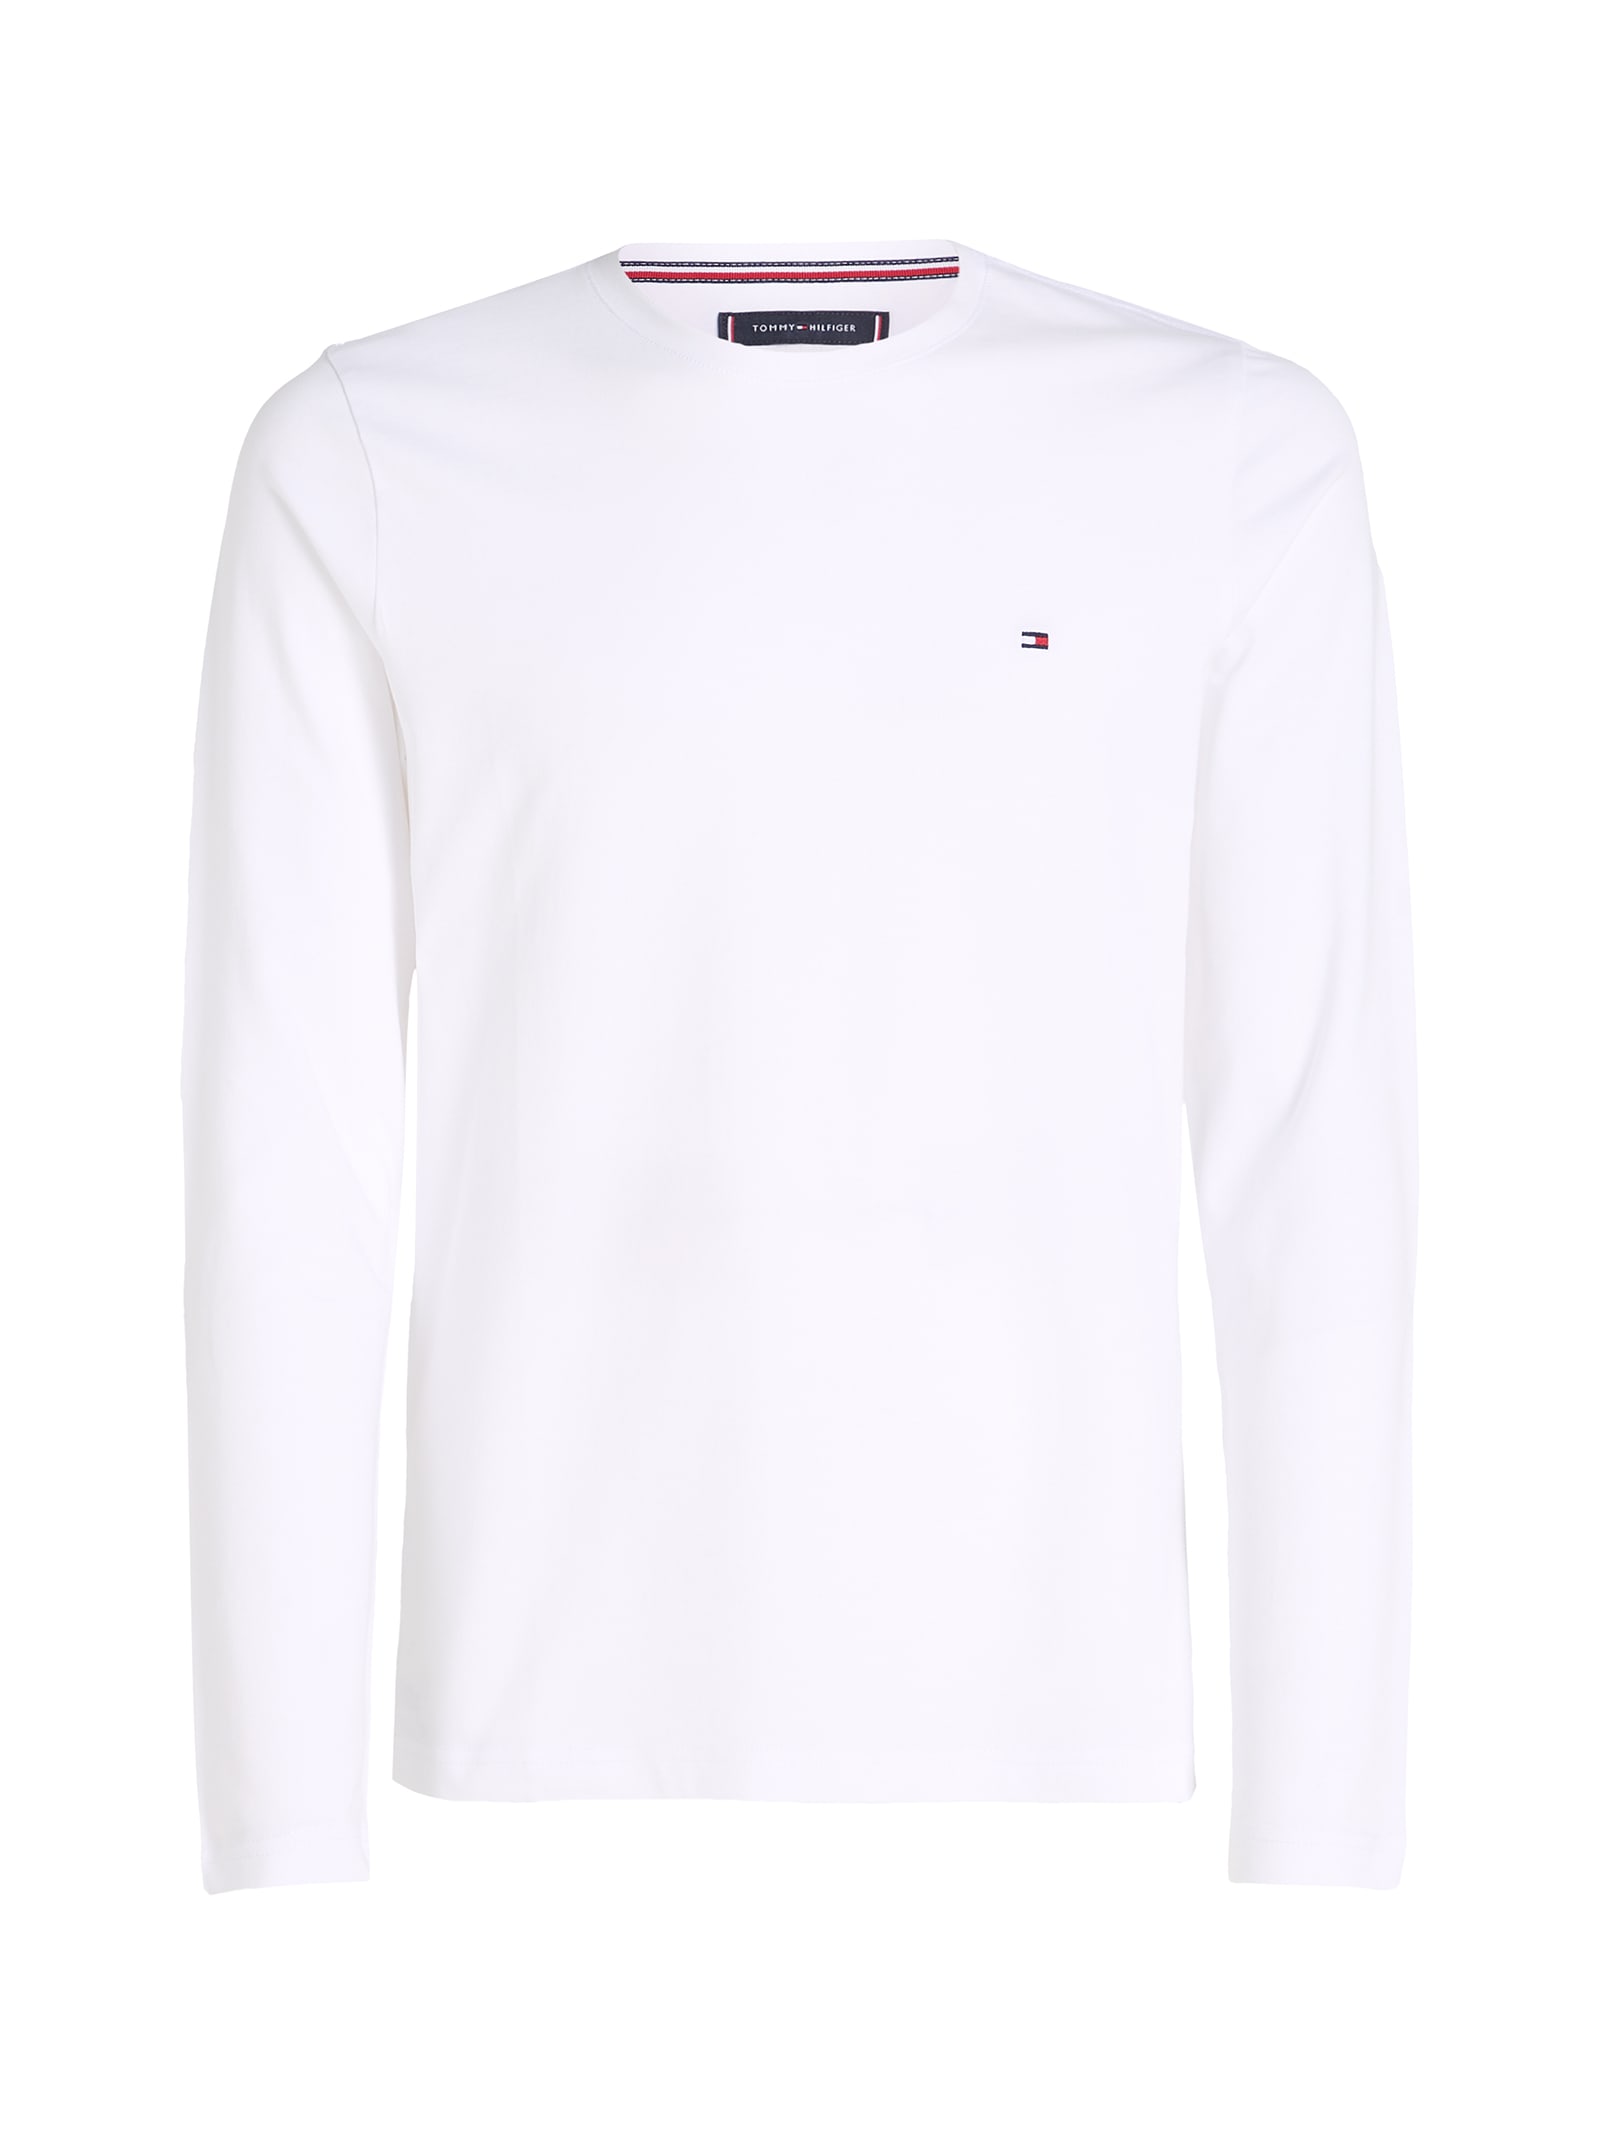 TOMMY HILFIGER WHITE LONG-SLEEVED SHIRT WITH LOGO